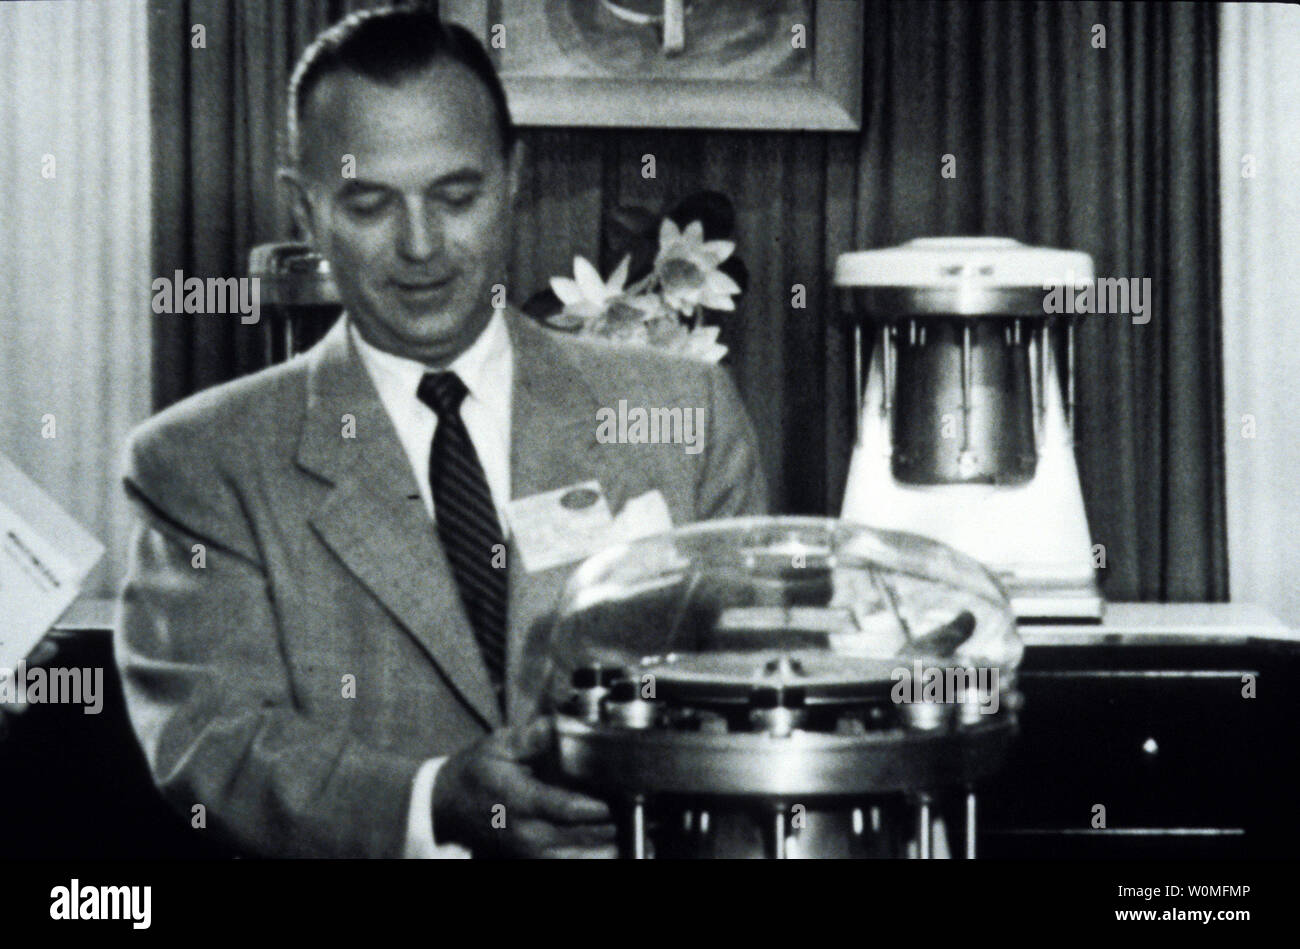 Ray Kroc, founder of McDonald's, is shown with a multimixer at one of his  first stores, in image supplied by McDonald's. UPI Stock Photo - Alamy